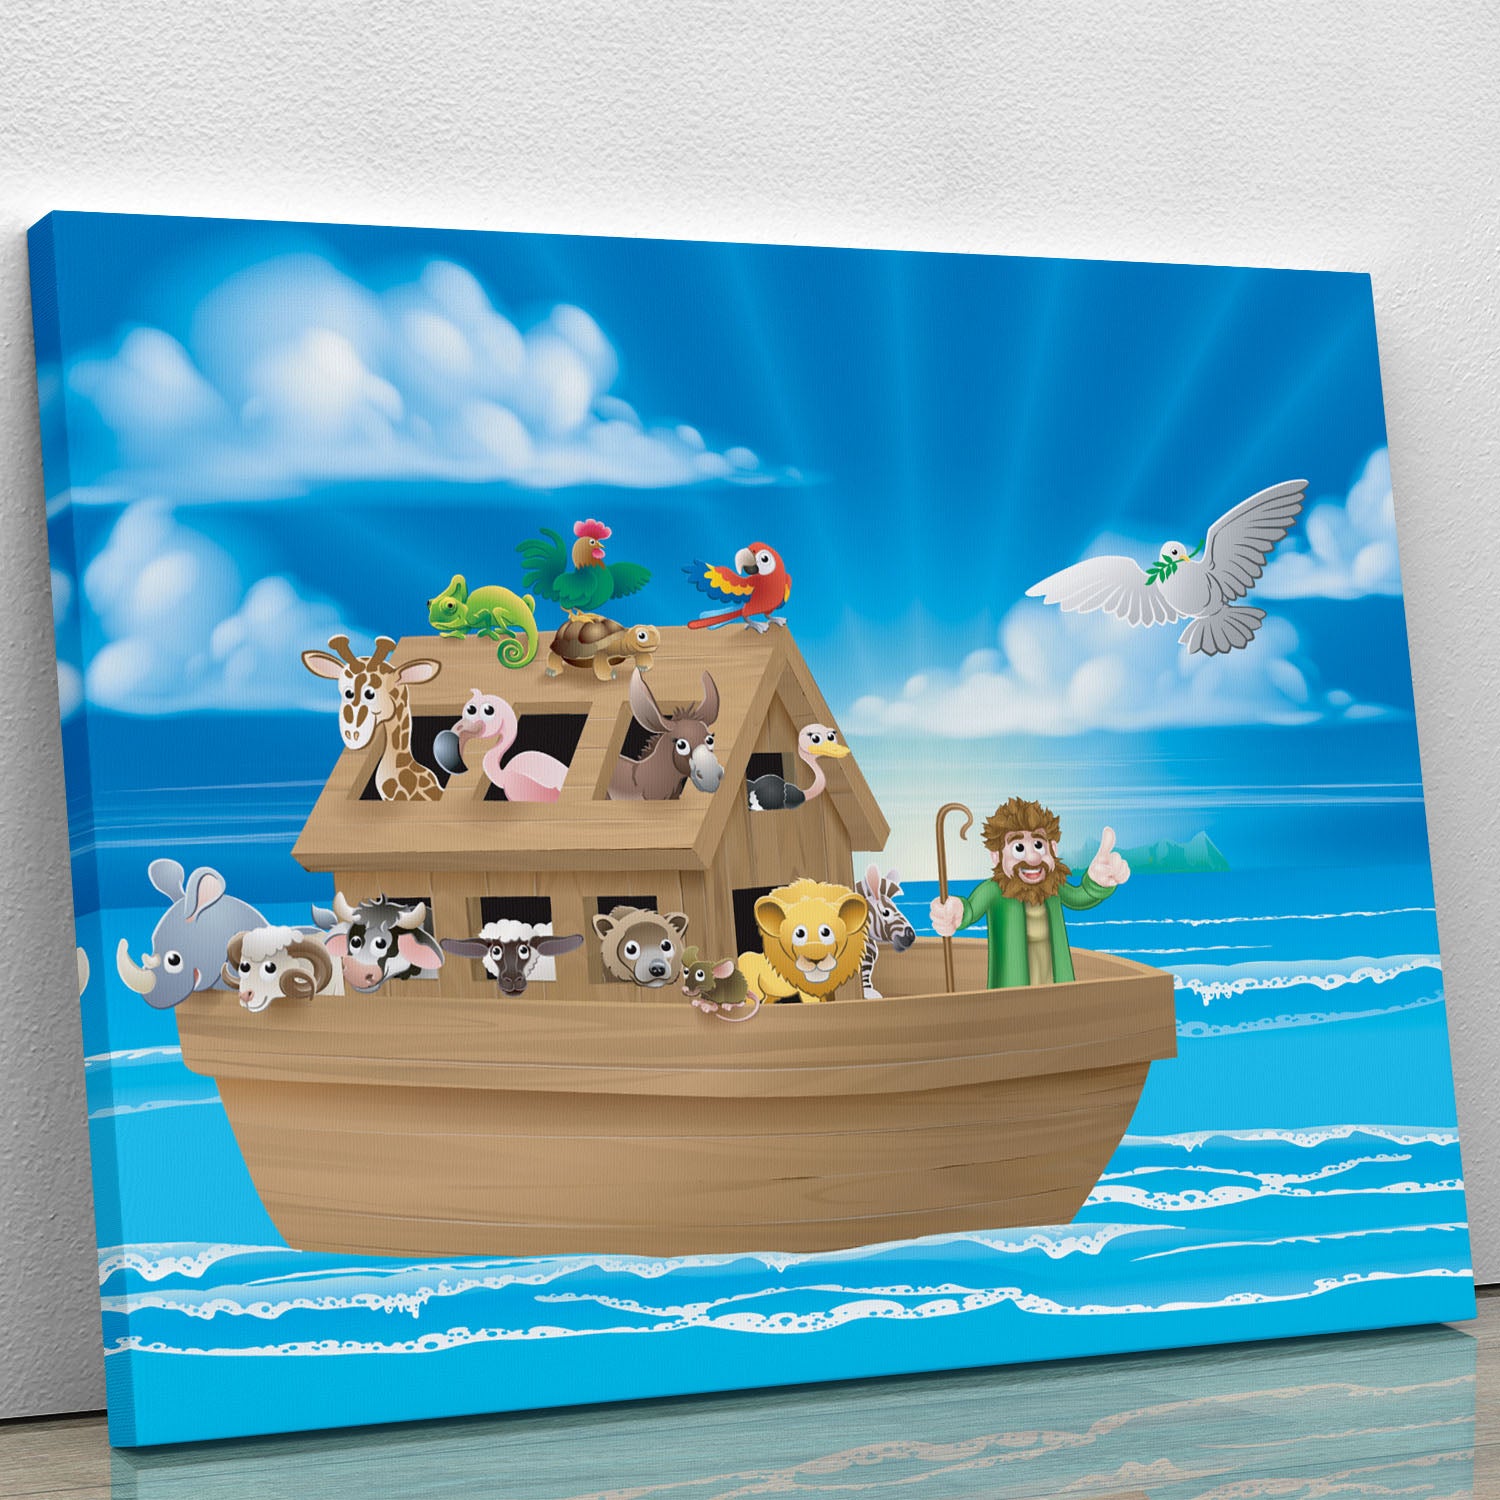 Cartoon childrens illustration of the Christian Bible story of Noah Canvas Print or Poster - Canvas Art Rocks - 1